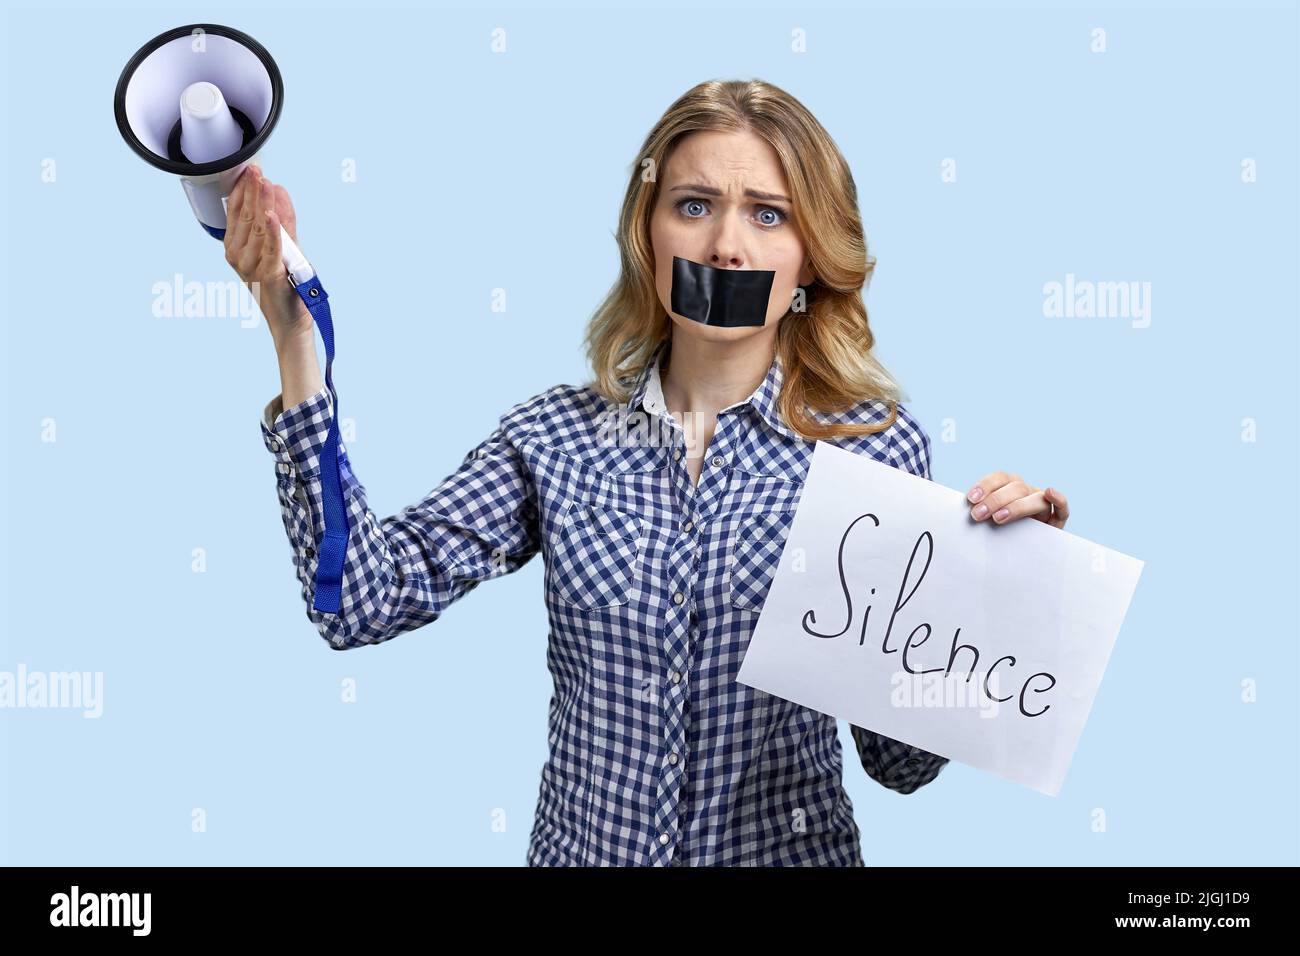 Woman protester with taped mouth holding banner with inscription Silence. Free speech concept. Stock Photo